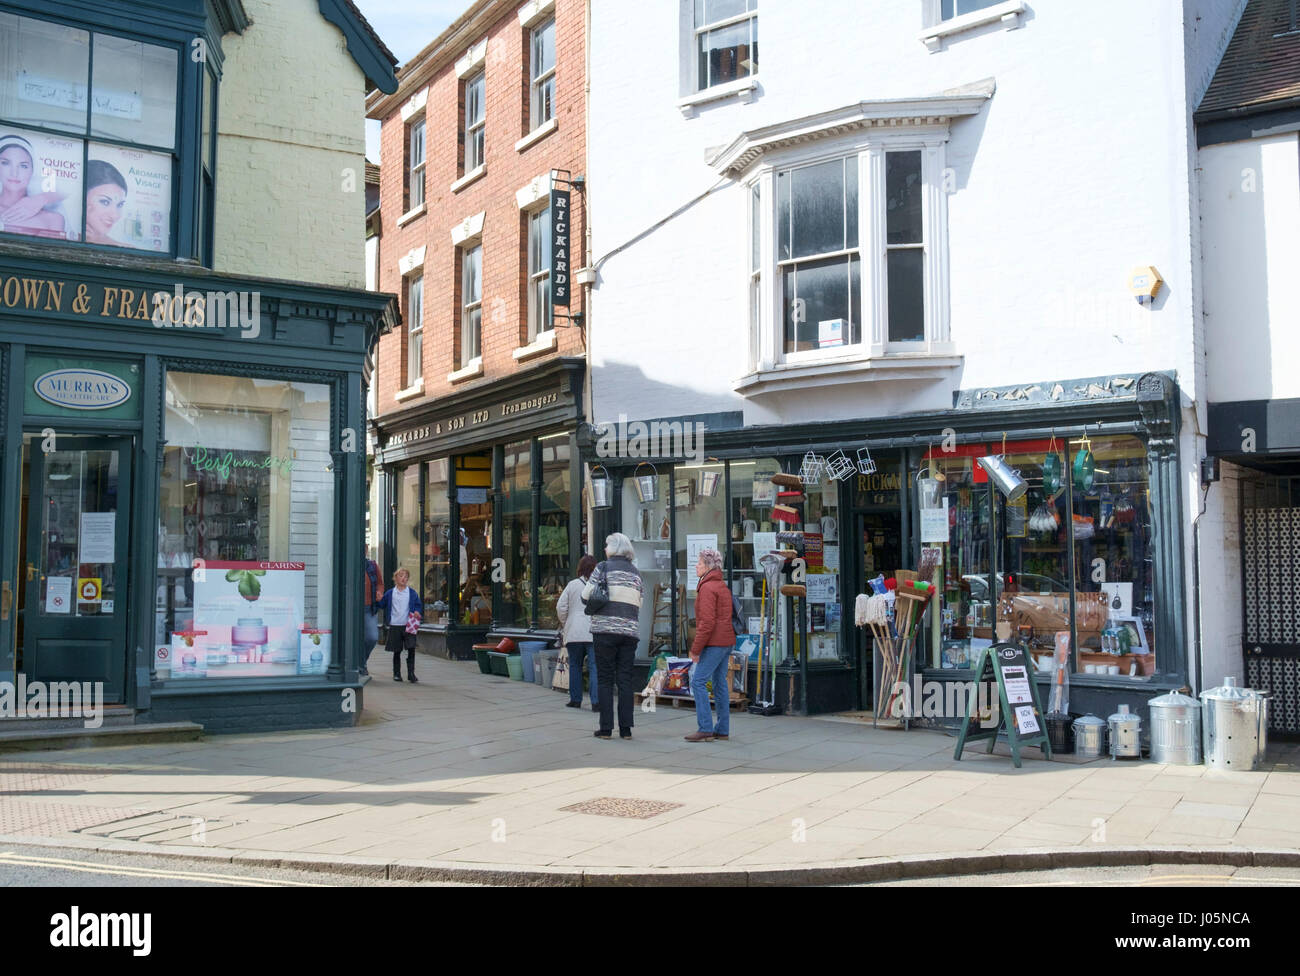 The Shrpshire town Ludlow, one of the pretiest in England UK Rickards Hardware shop Stock Photo